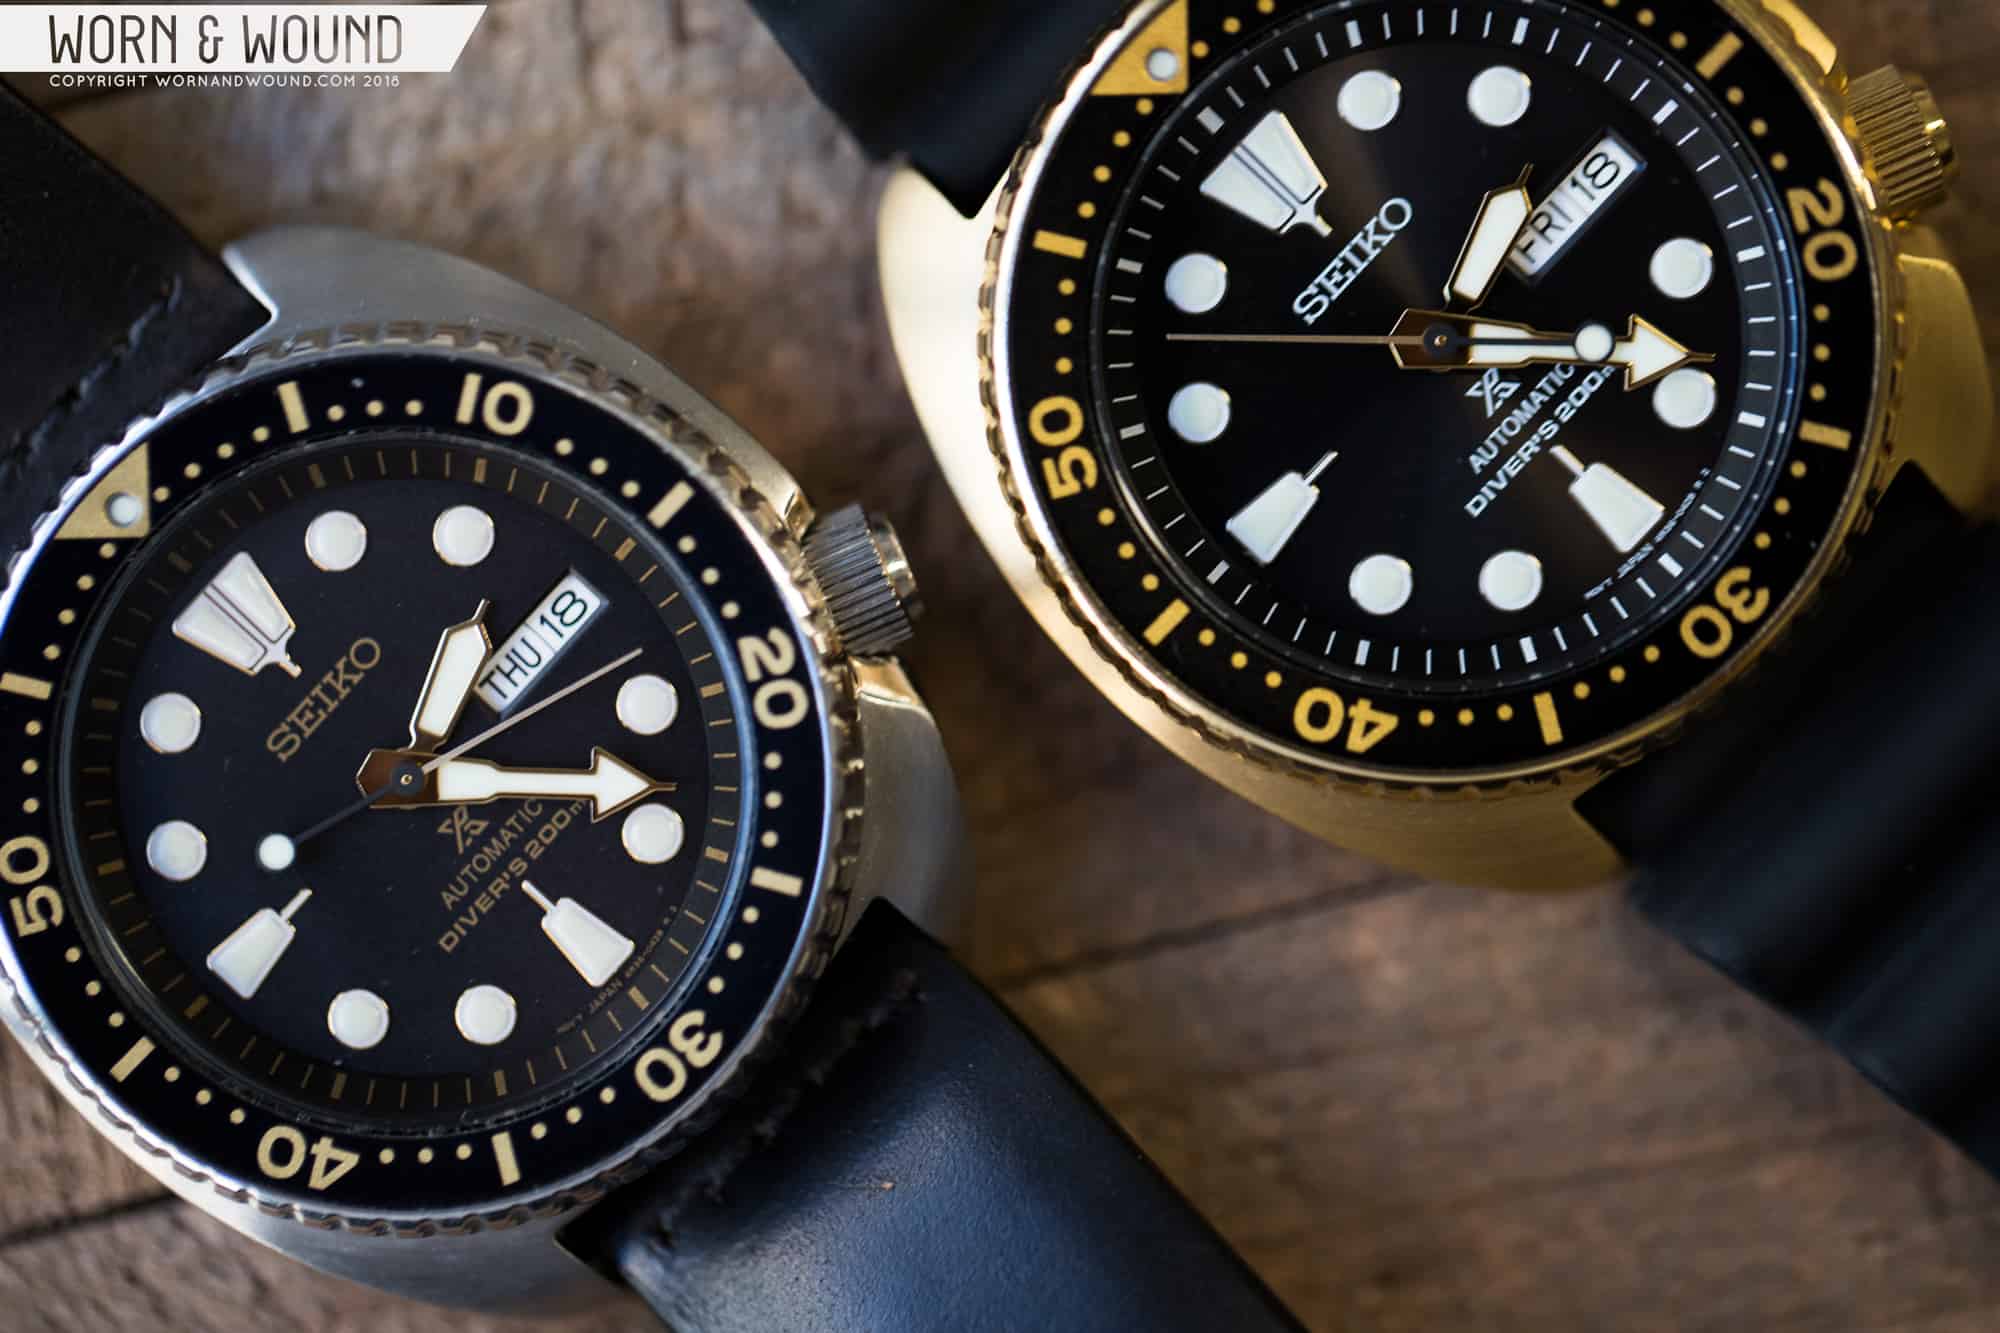 Hands-On (Video) With the Seiko Prospex ref. SRPC44 